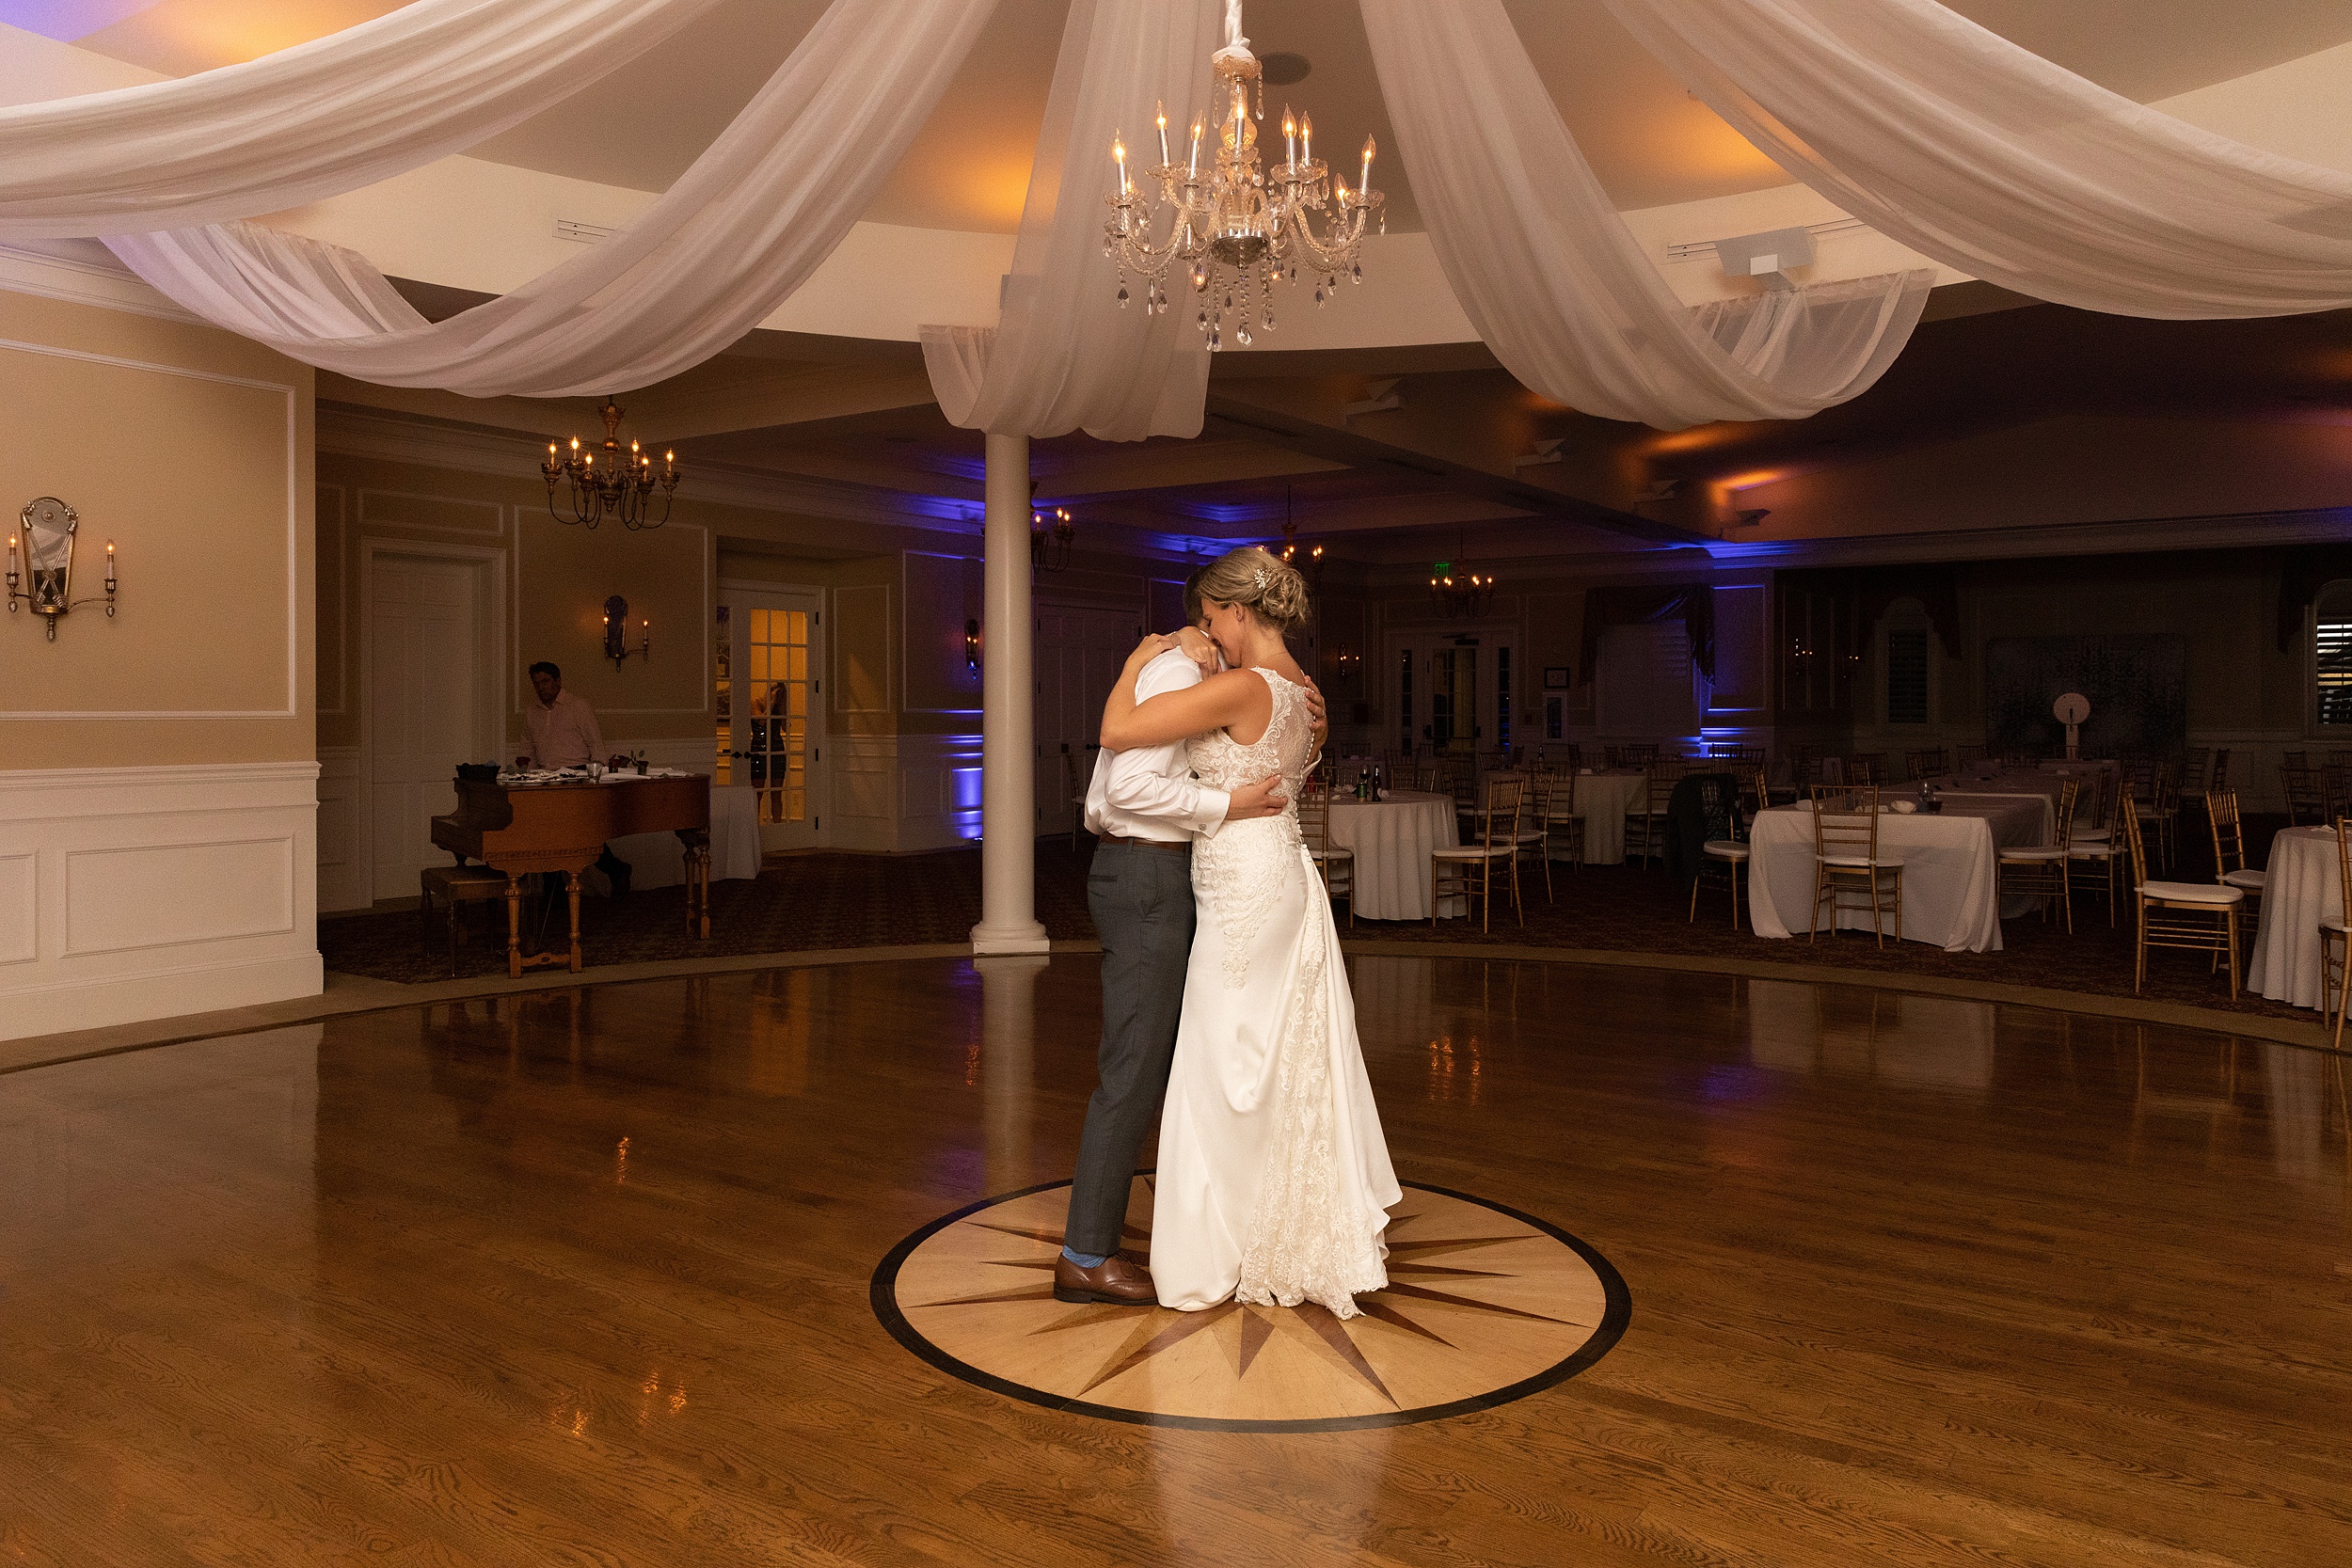 Newlyweds dance close in the center of their river house events wedding reception dance floor